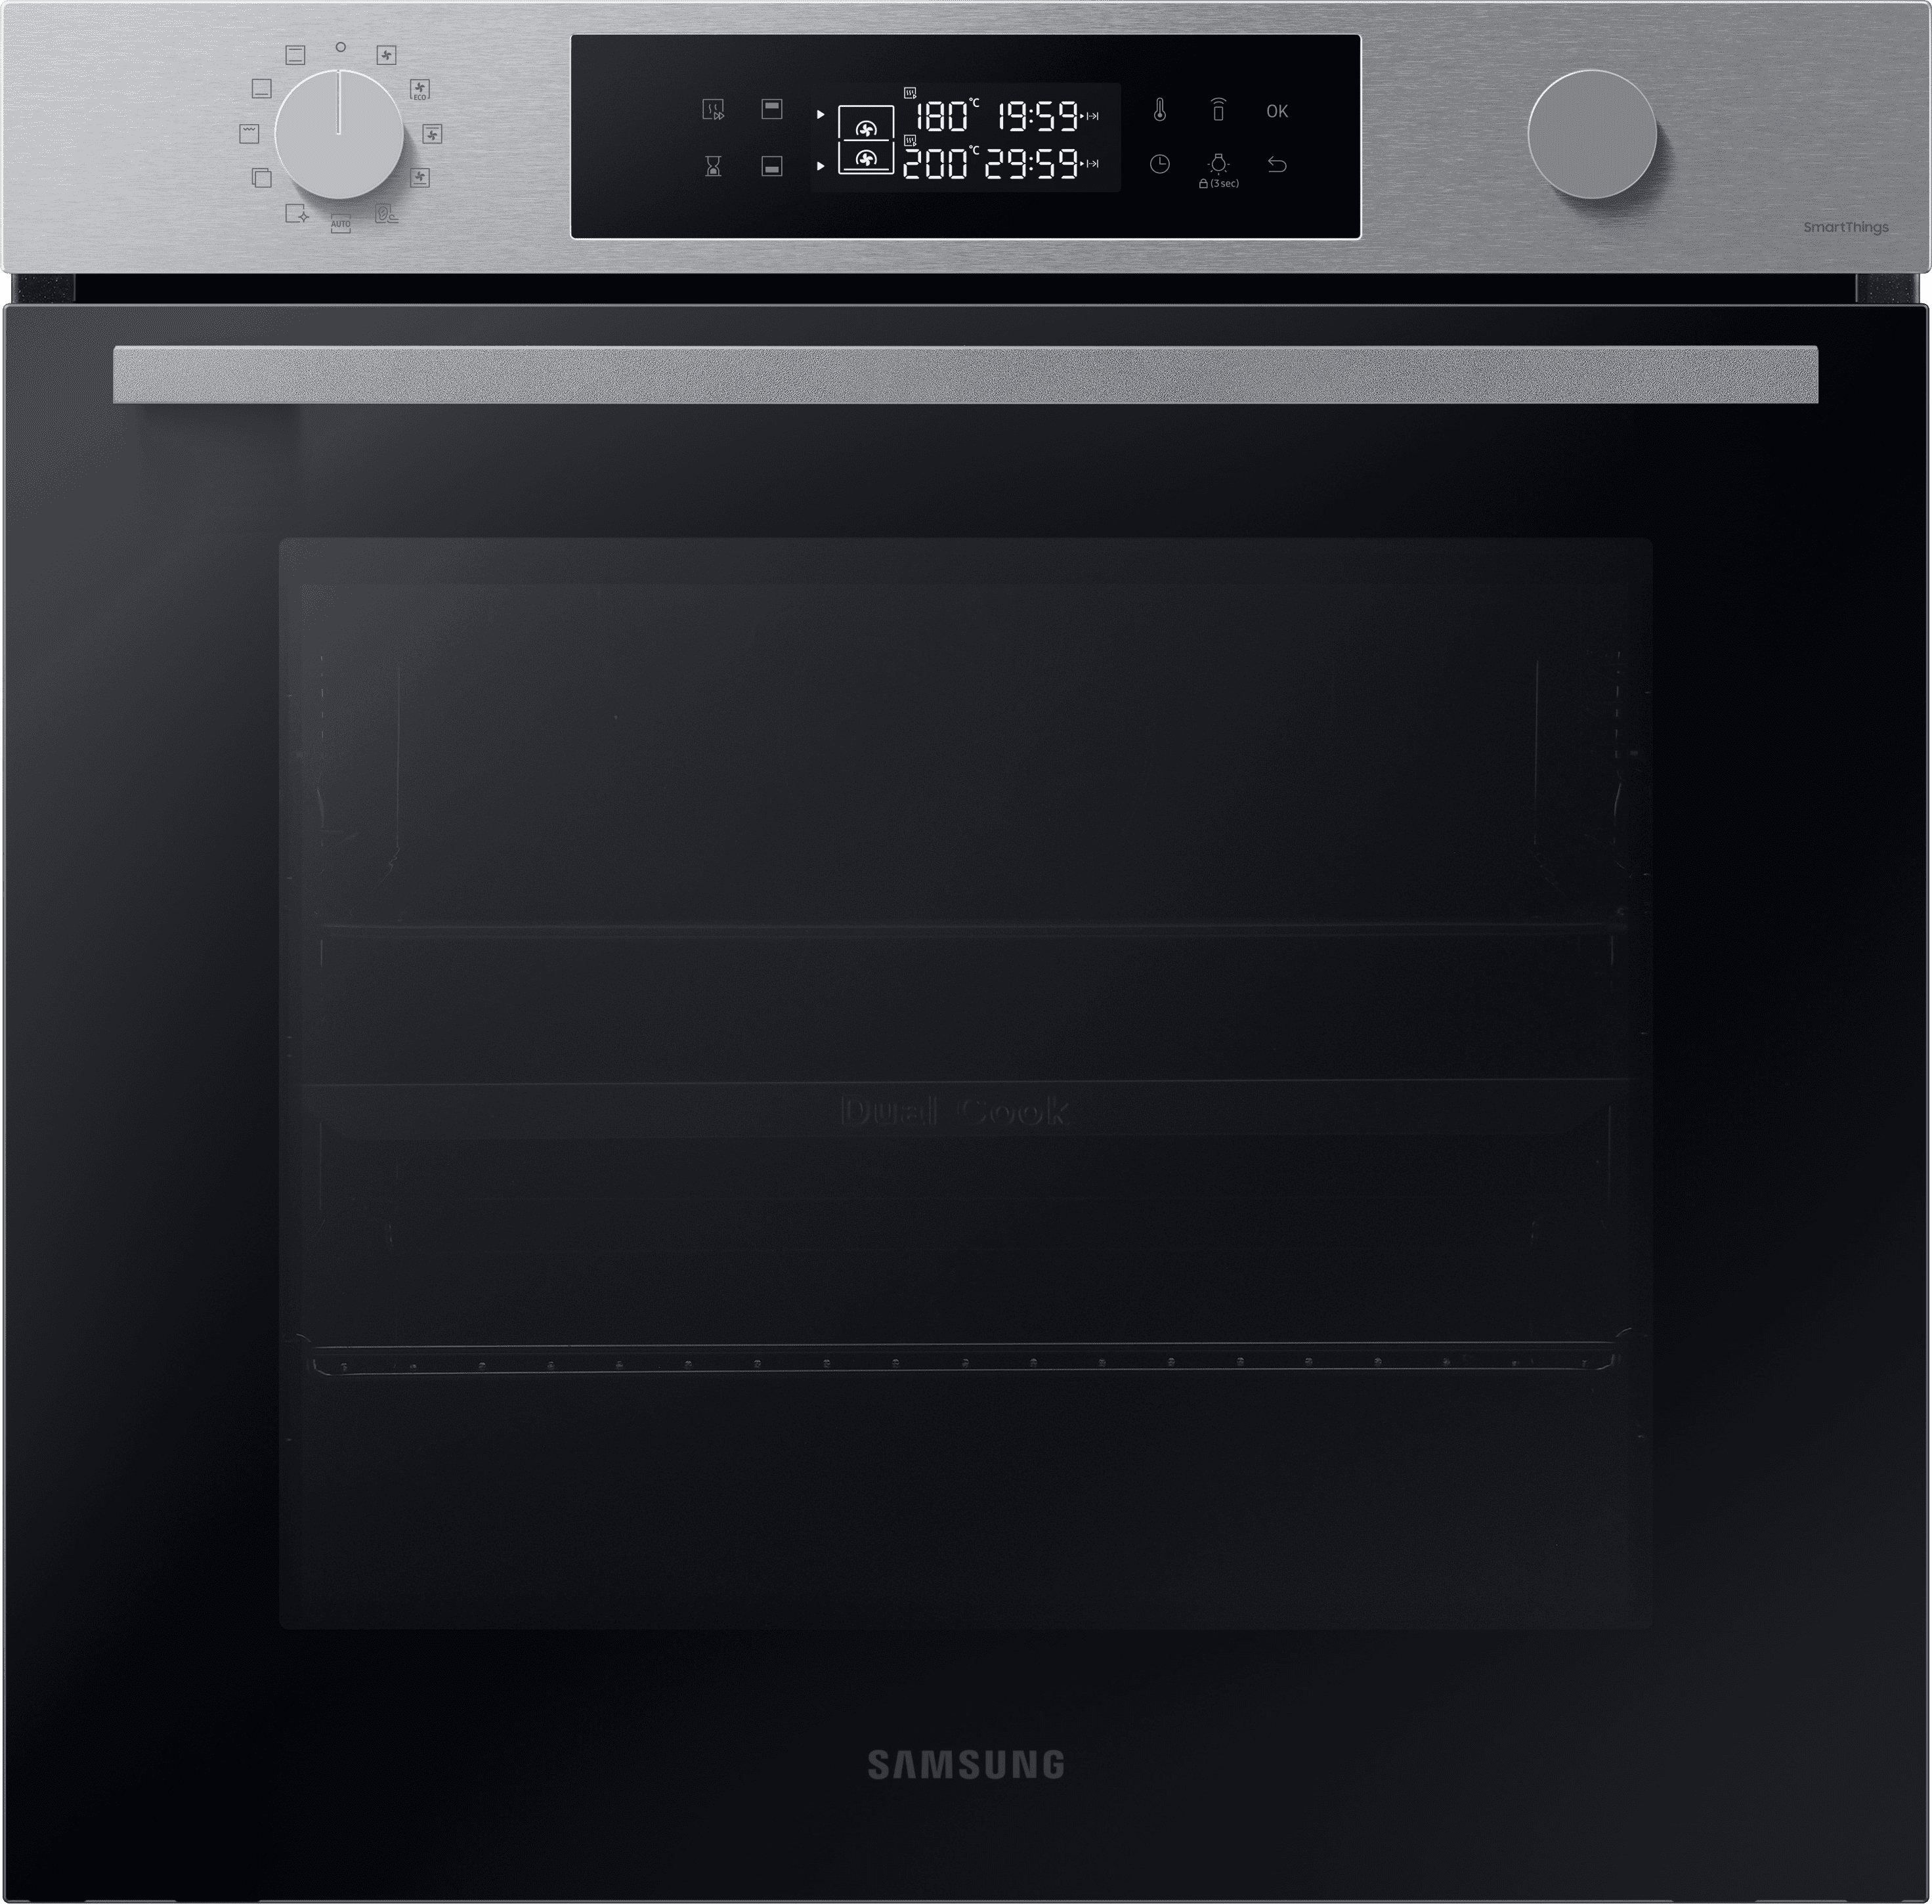 Samsung Series 4 Dual Cook NV7B4430ZAS Wifi Connected Built In Electric Single Oven and Pyrolytic Cleaning - Stainless Steel - A+ Rated, Stainless Steel